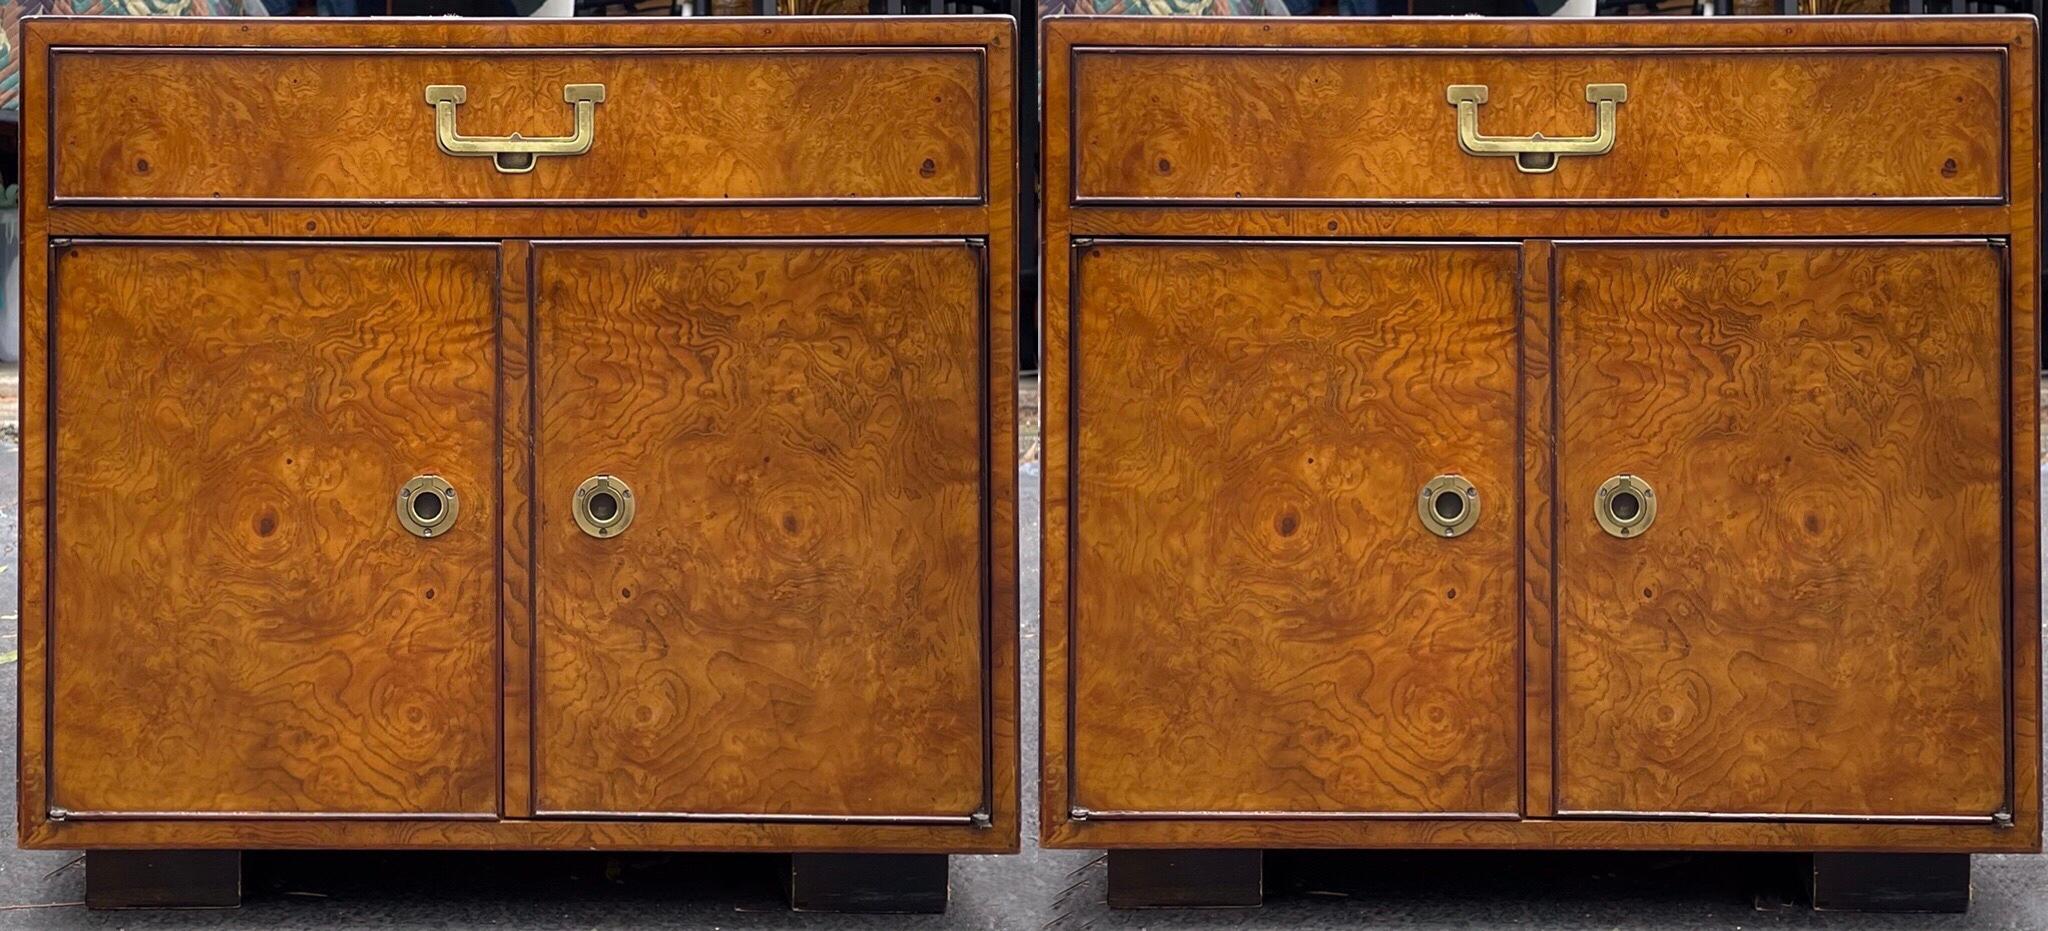 This is a good looking pair of 1970s burl wood modern campaign style cabinets by John Widdicomb. They are in very good condition, and I do have the long chest and tall gentleman’s armoire if interested.